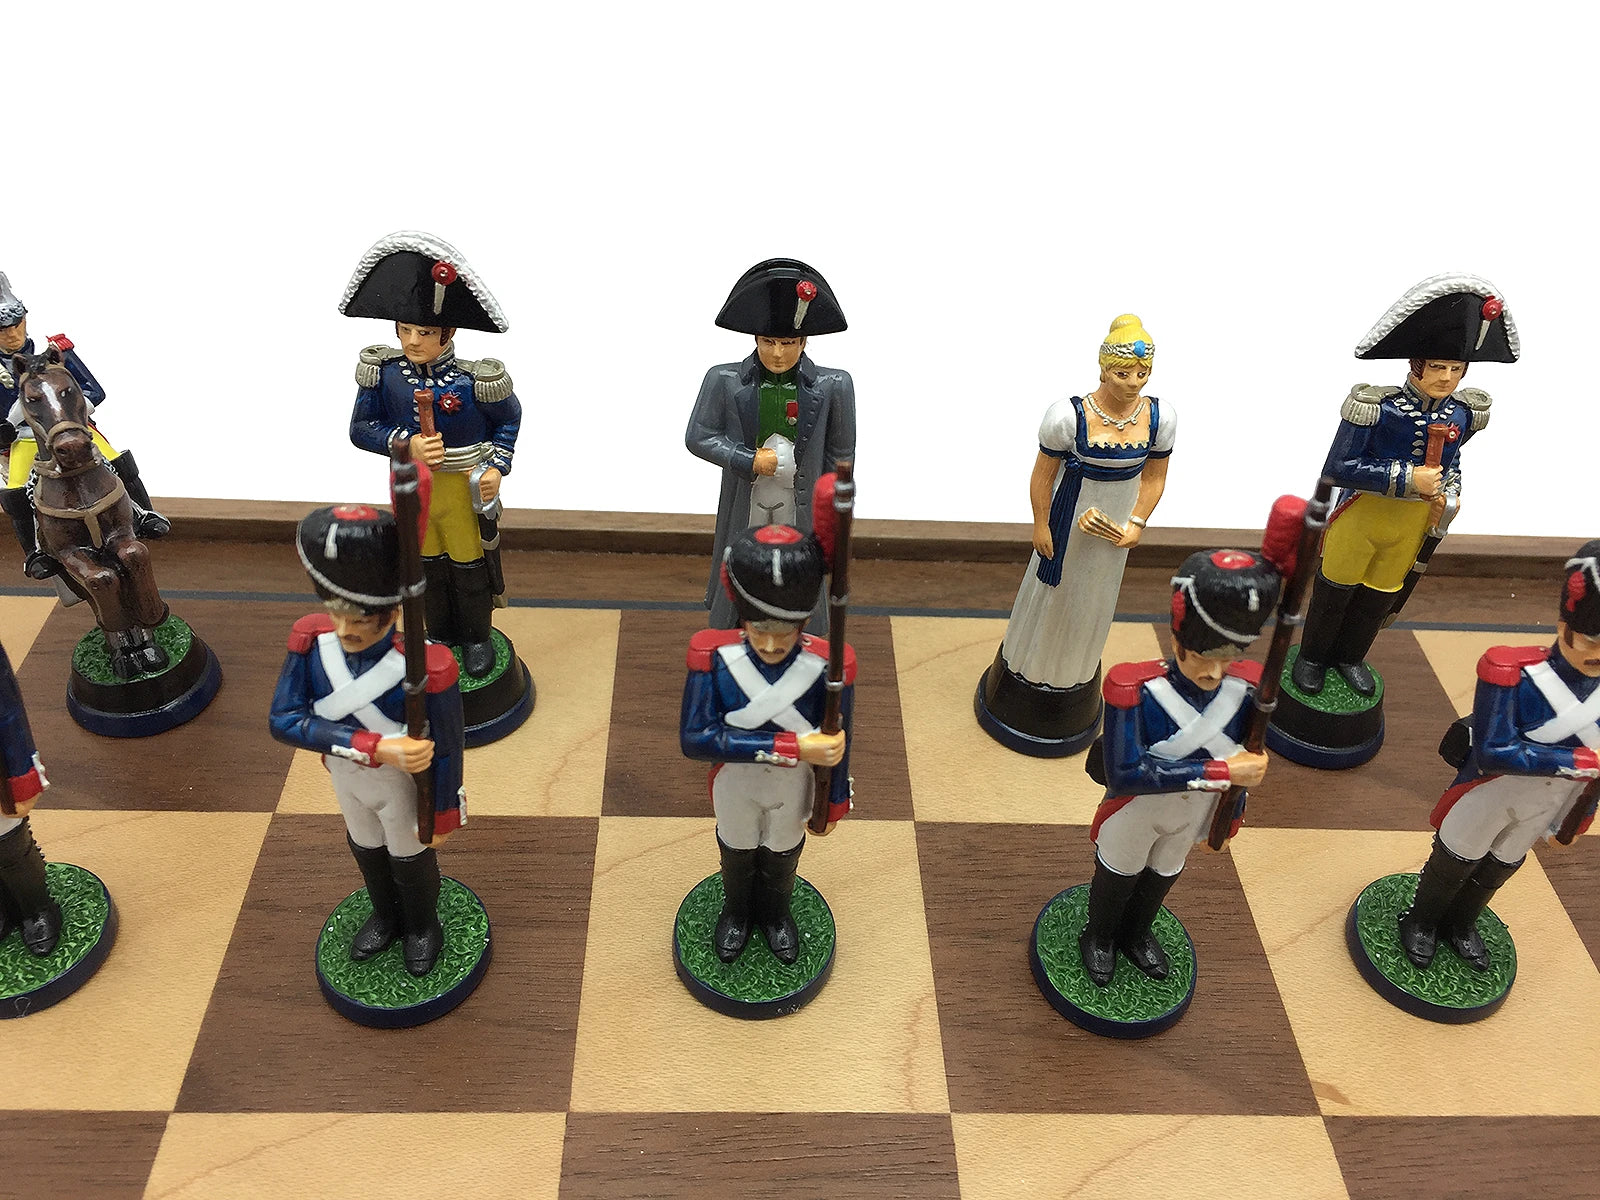 Toy soldier chess set Battle of Waterloo. Hand painted. French troops.